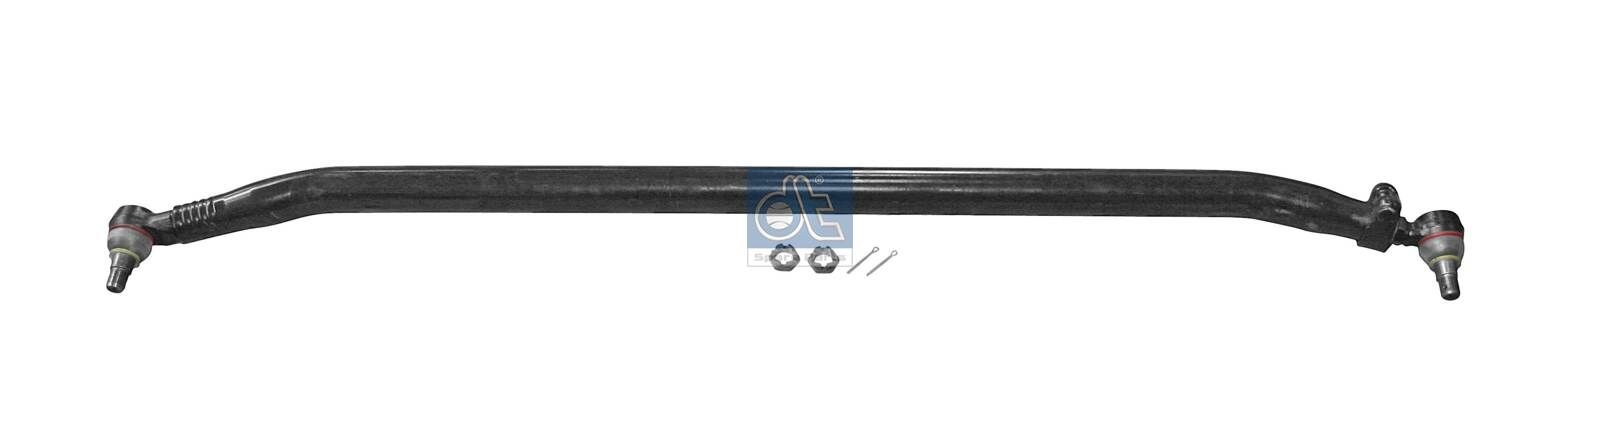 DT Spare Parts 6.53021 Rod Assembly 21 560 963